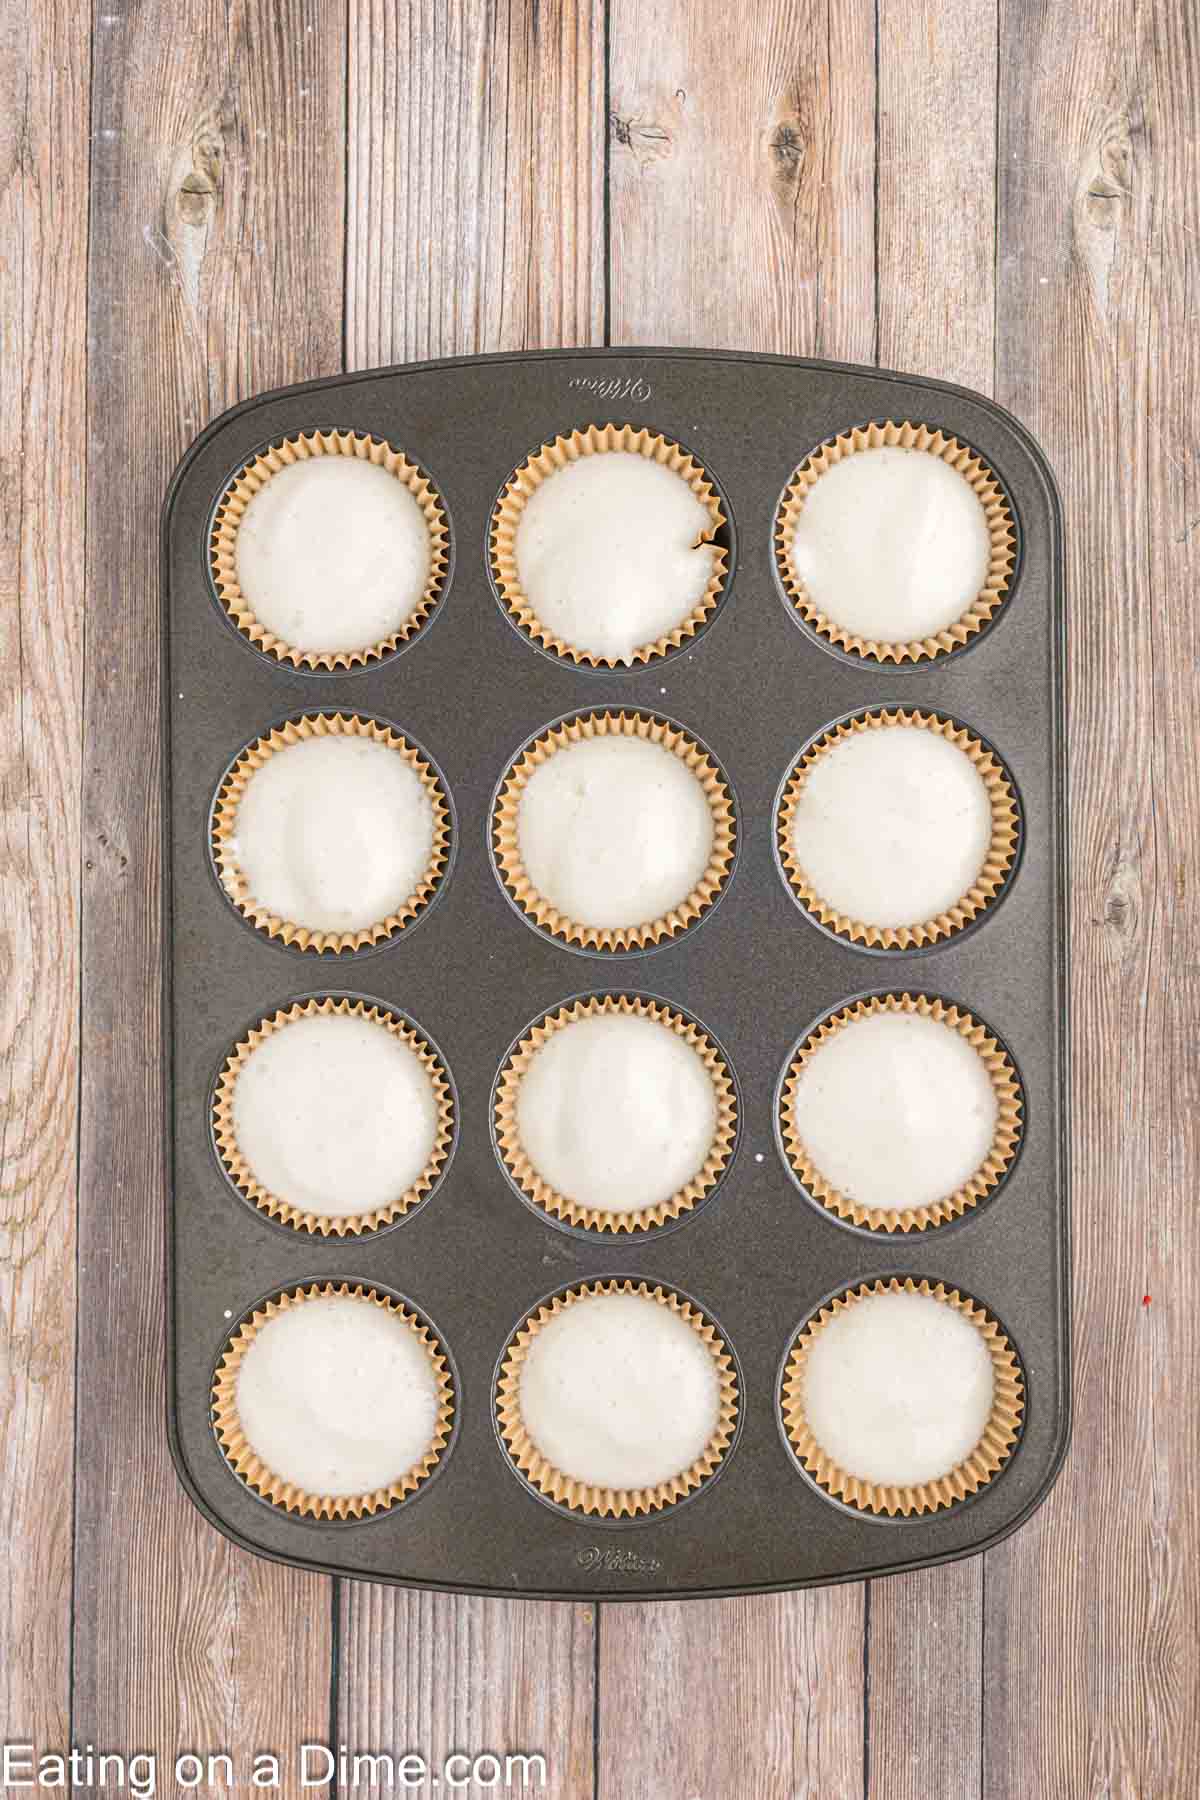 Placing the angel food cake batter into the muffin tin